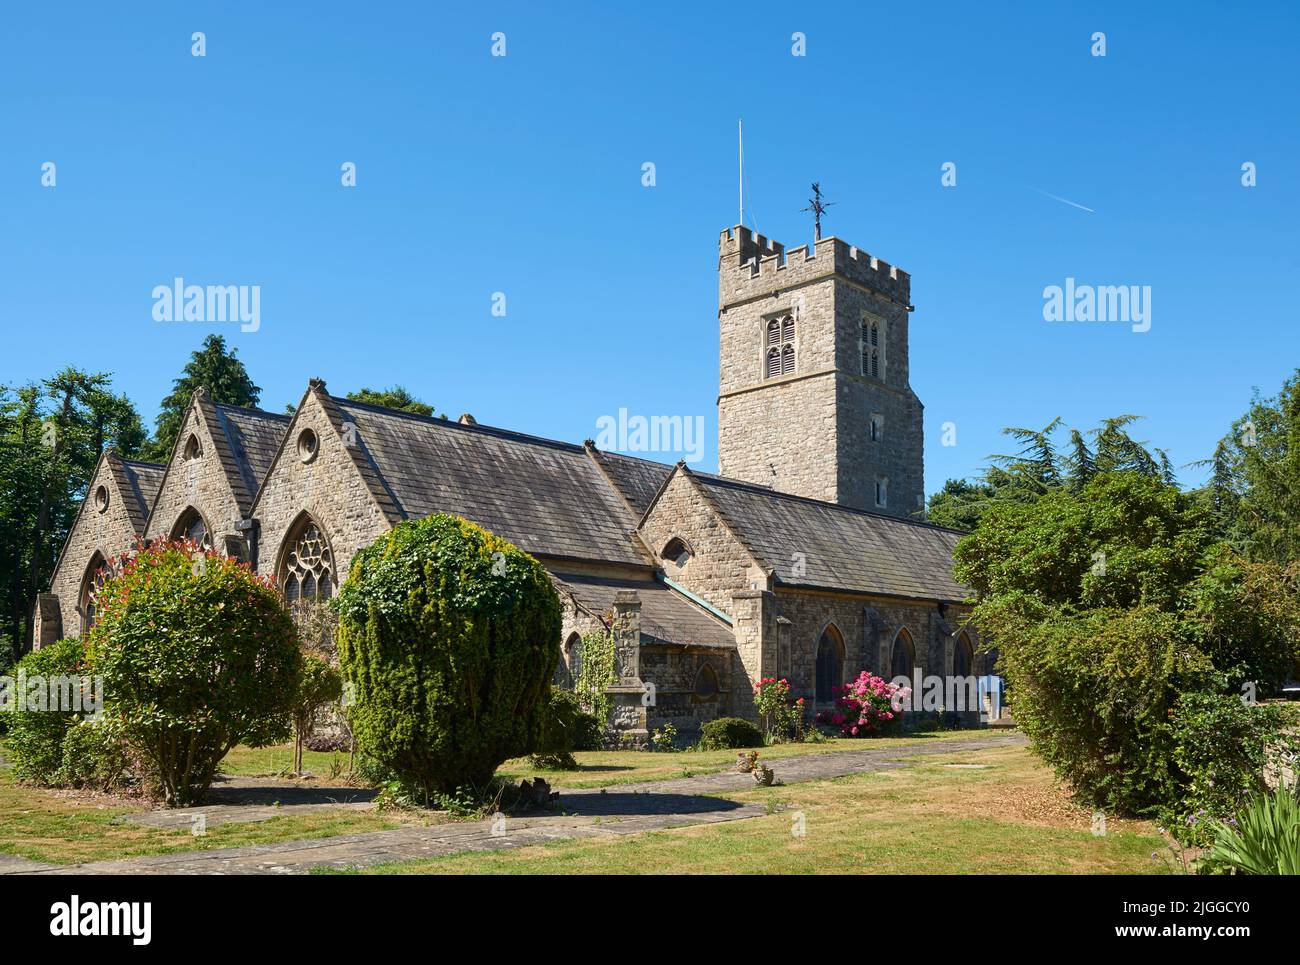 The historic St Leonards church, Heston, in the London Borough of Hounslow, with tower dating from the 14th century Stock Photo